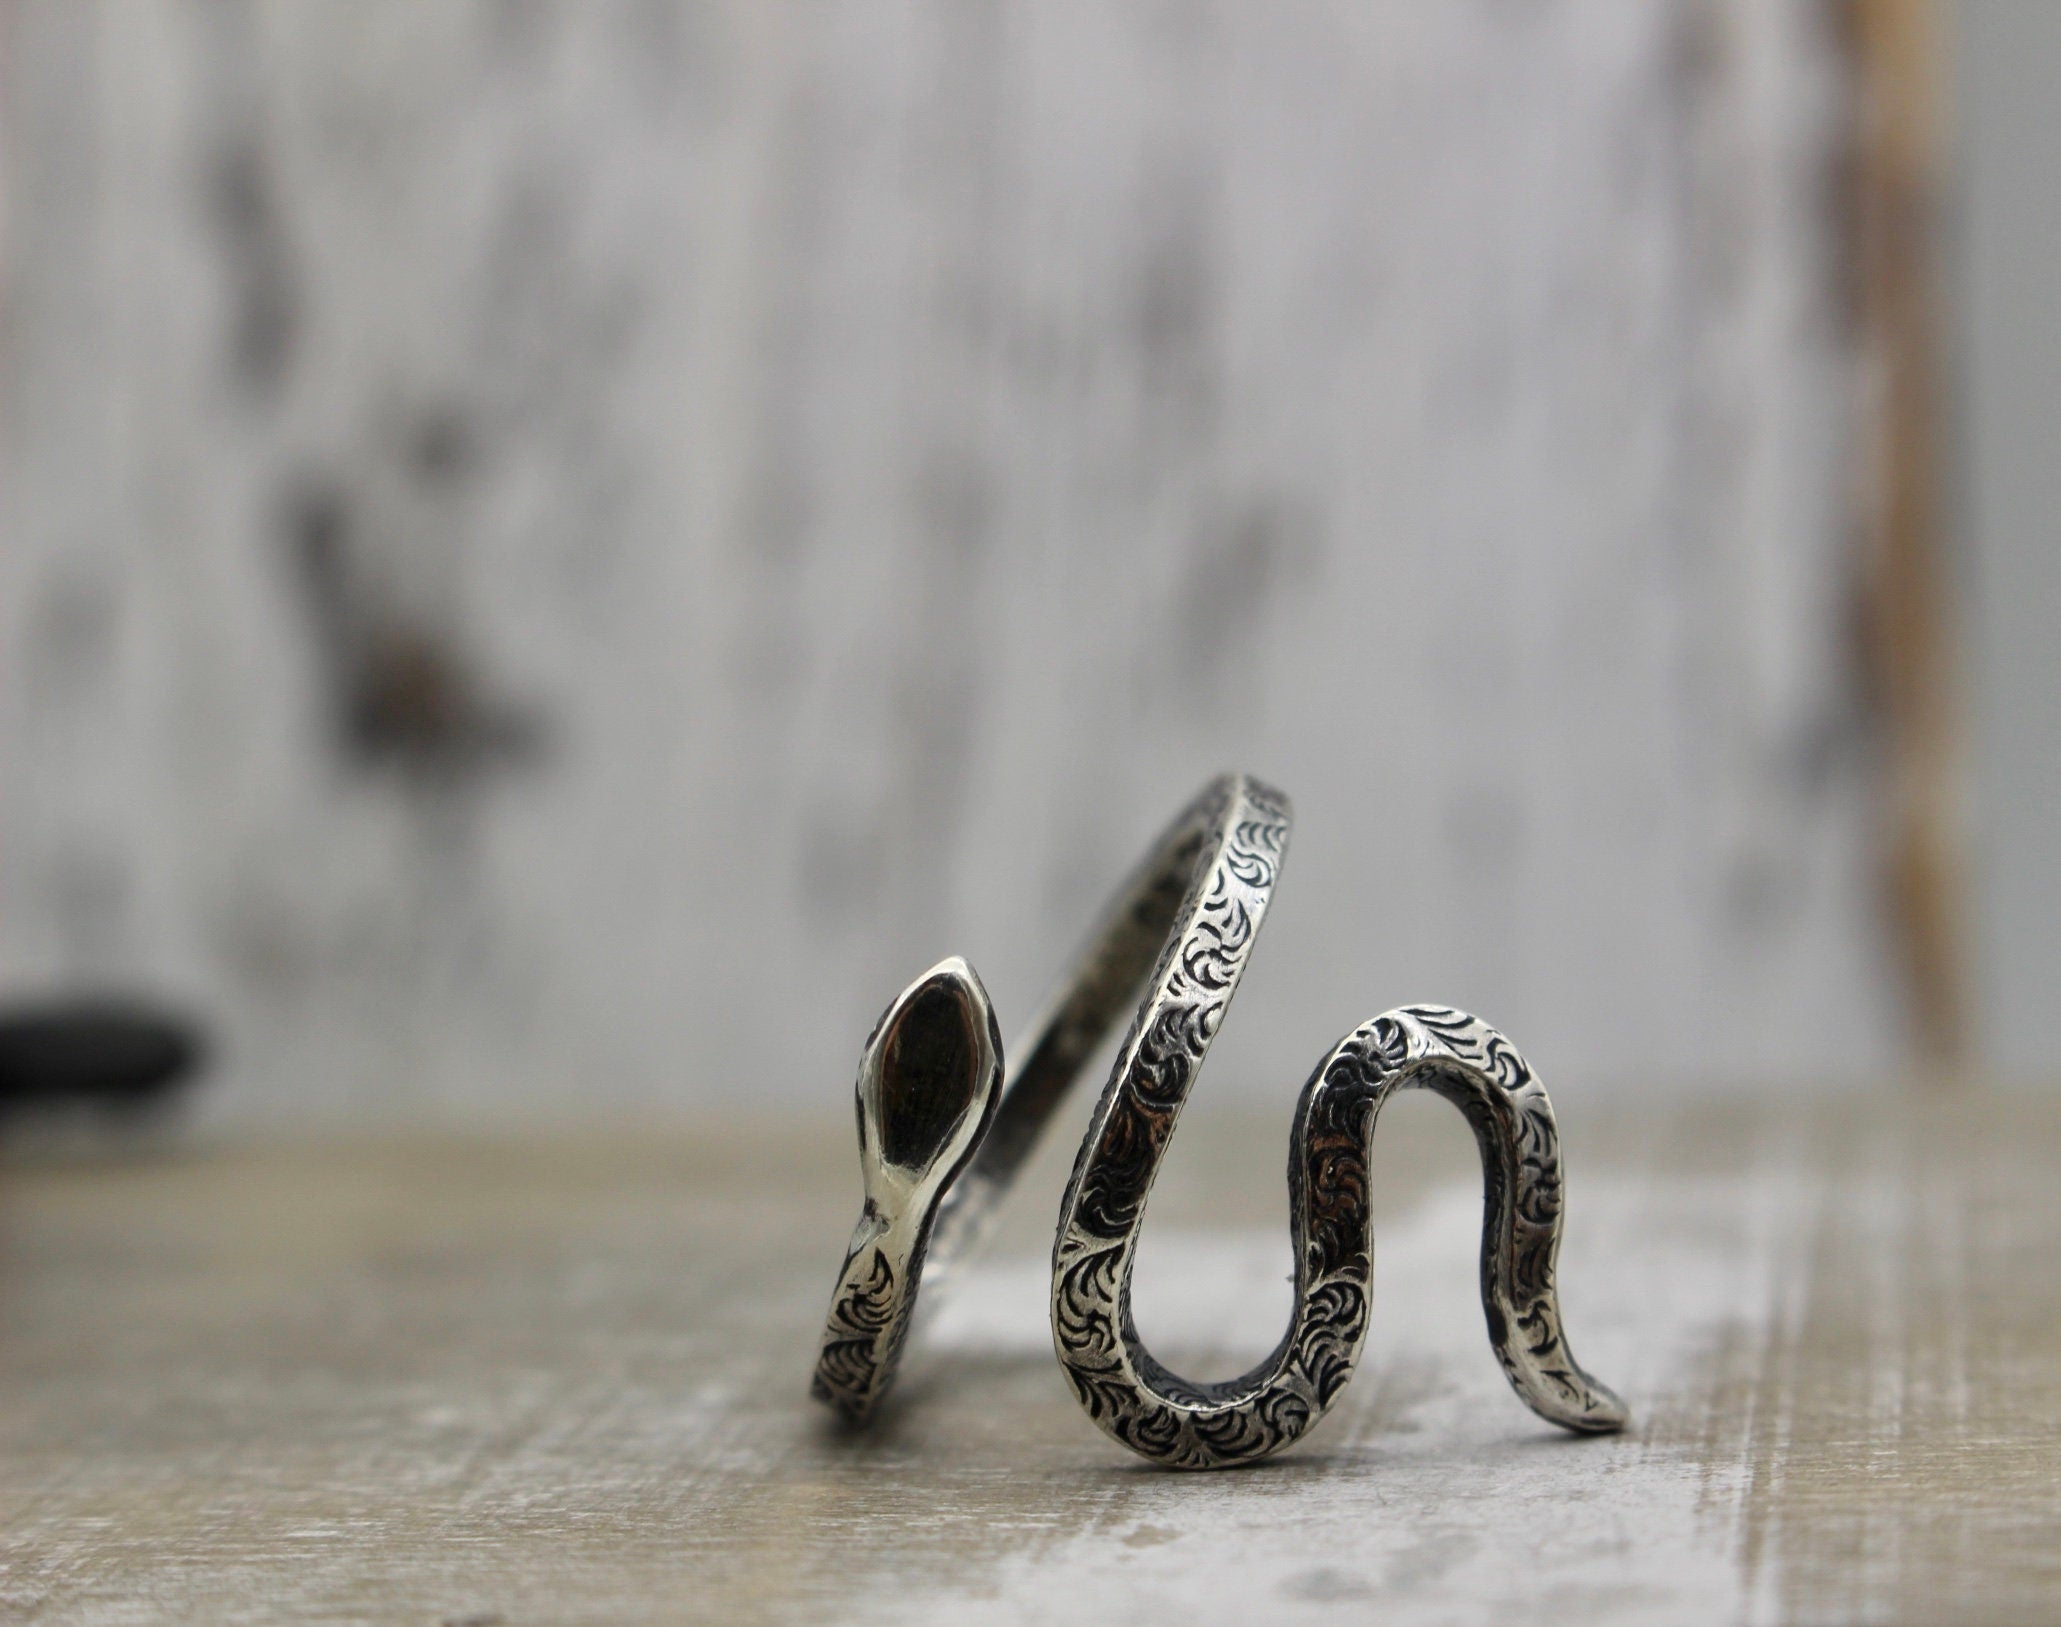 Silver Serpent ring, sterling silver patterned ring, snake, serpent, jewelry for her